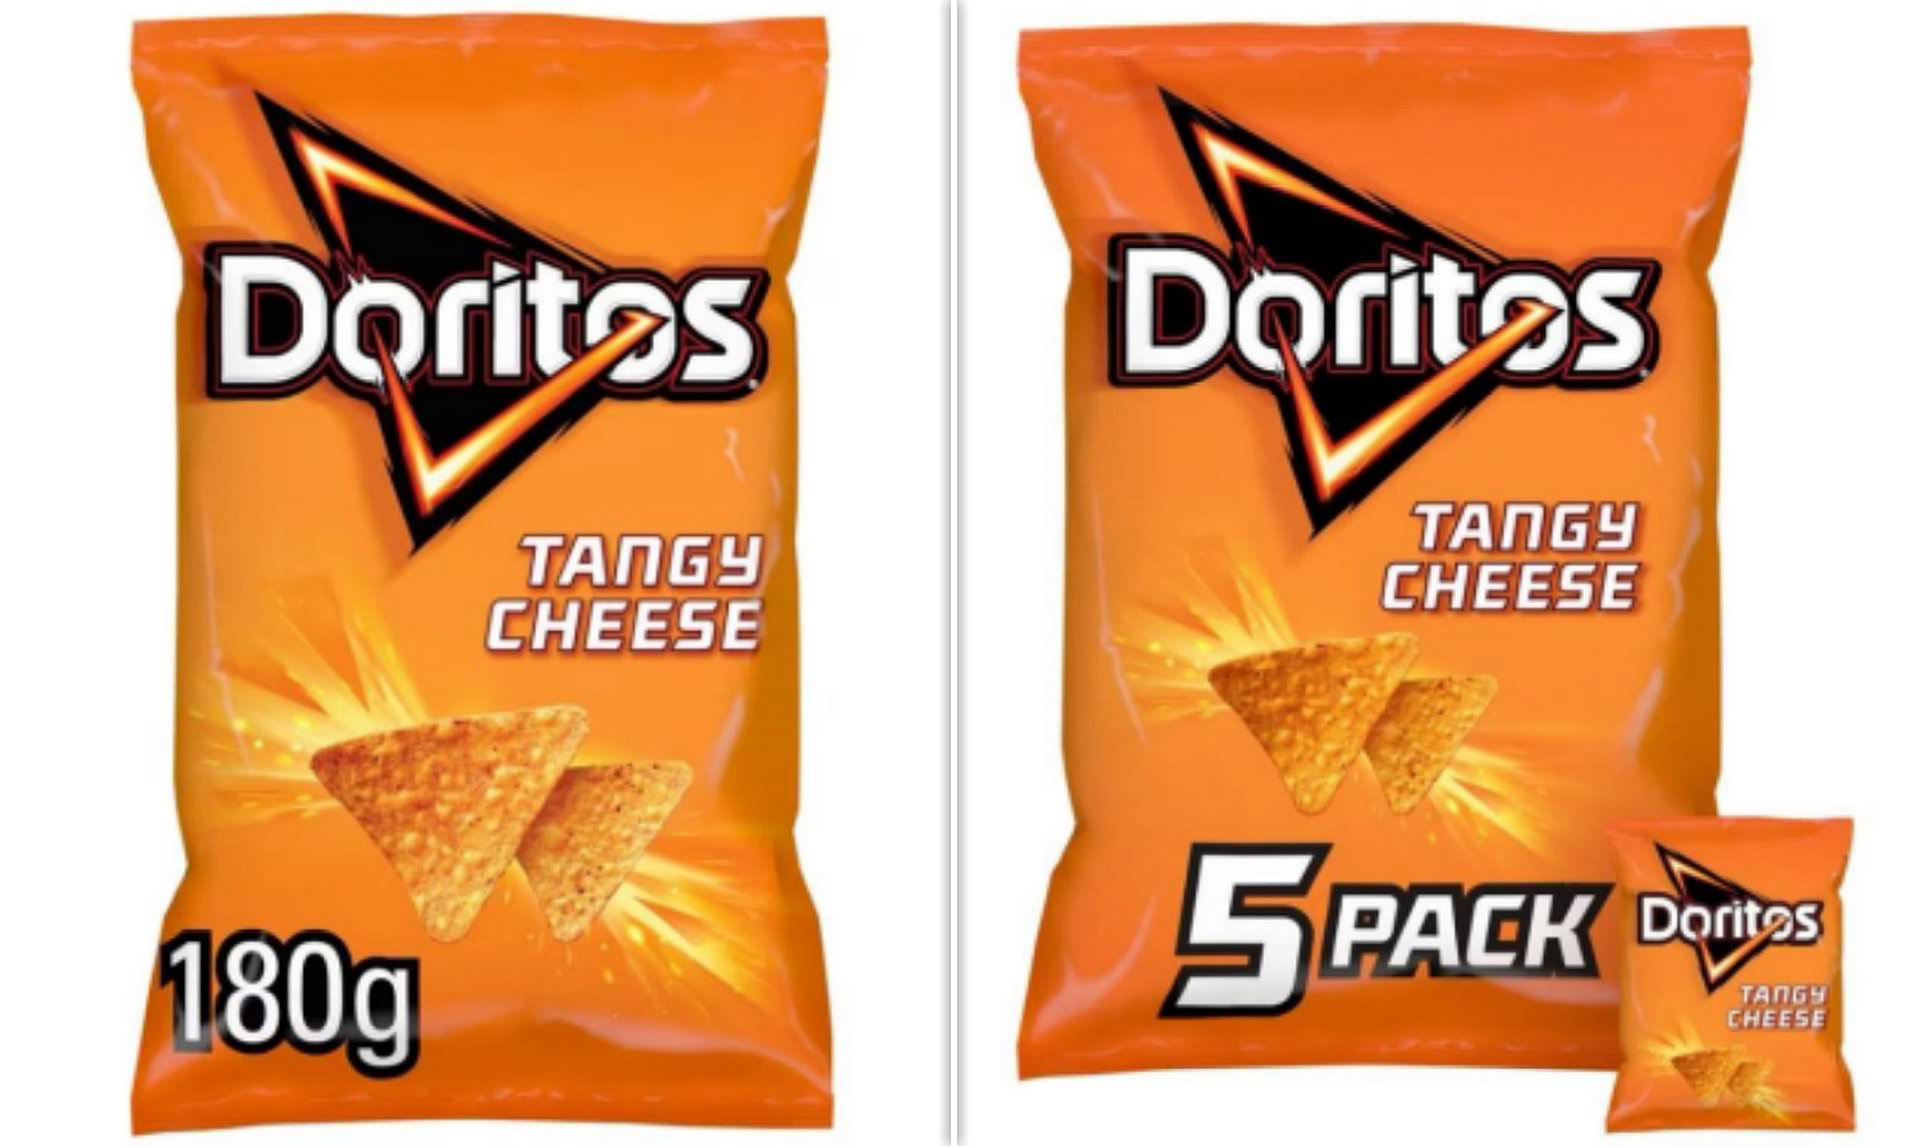 Doritos issue urgent recall notice for Tangy Cheese packets bought in Tesco  that may be harmful to anyone with soya allergy